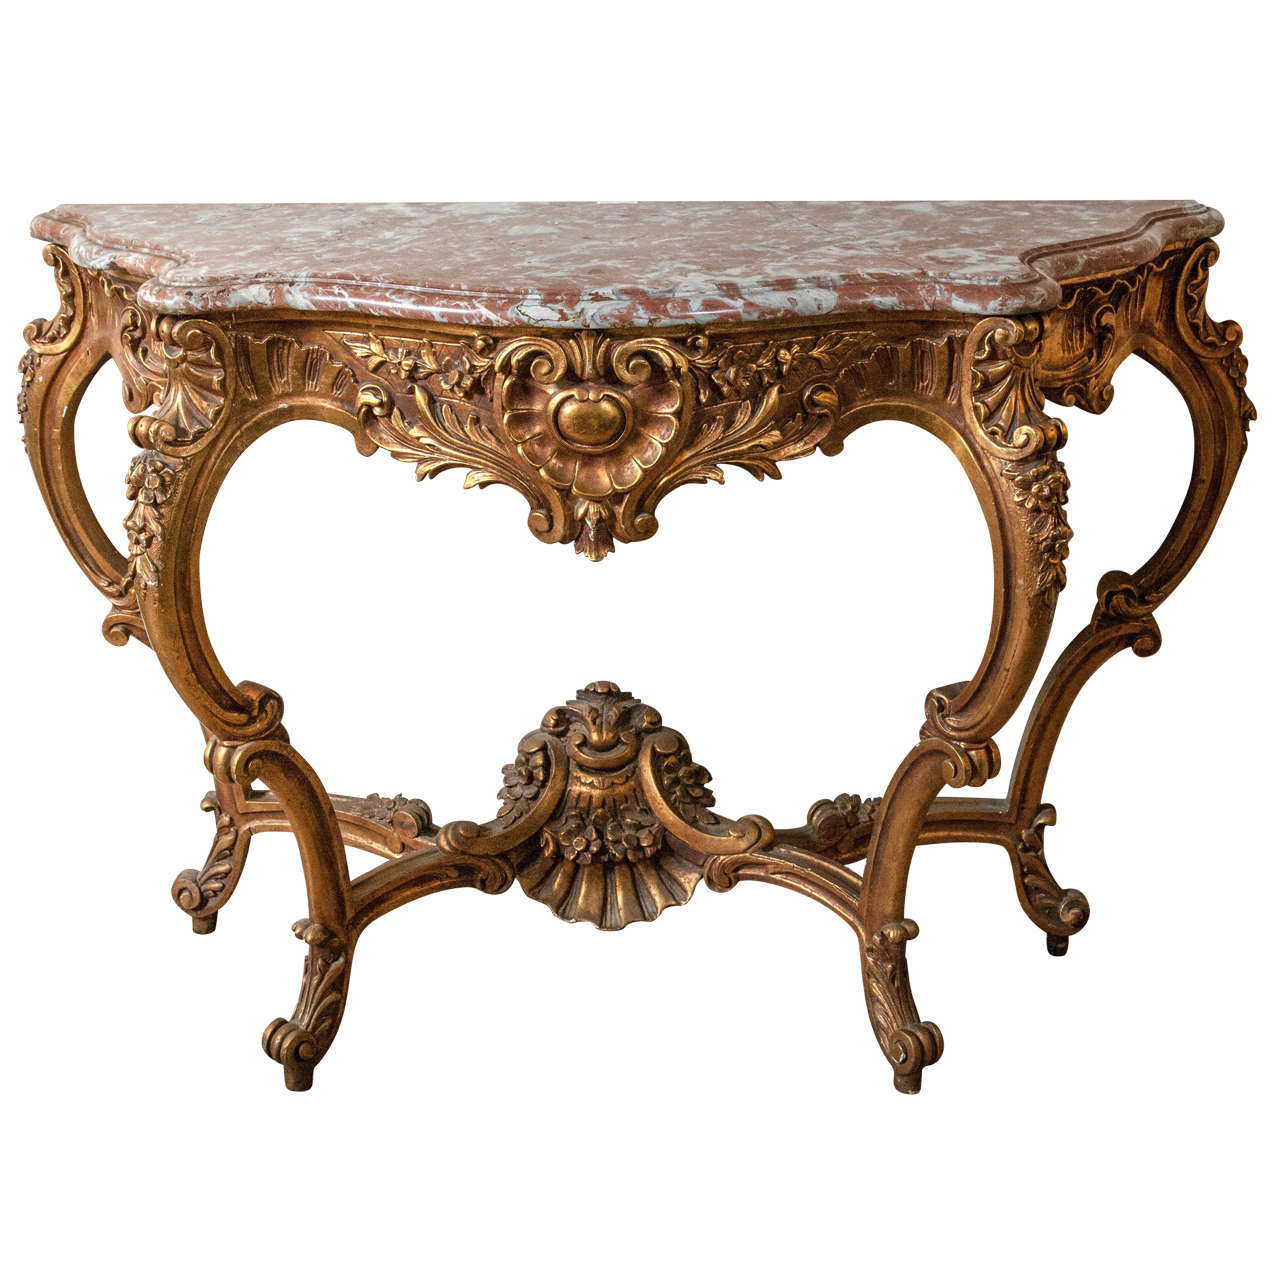 Marble-Top Louis XV Style Console Table by Jansen Exquisite Carved Details 1920s